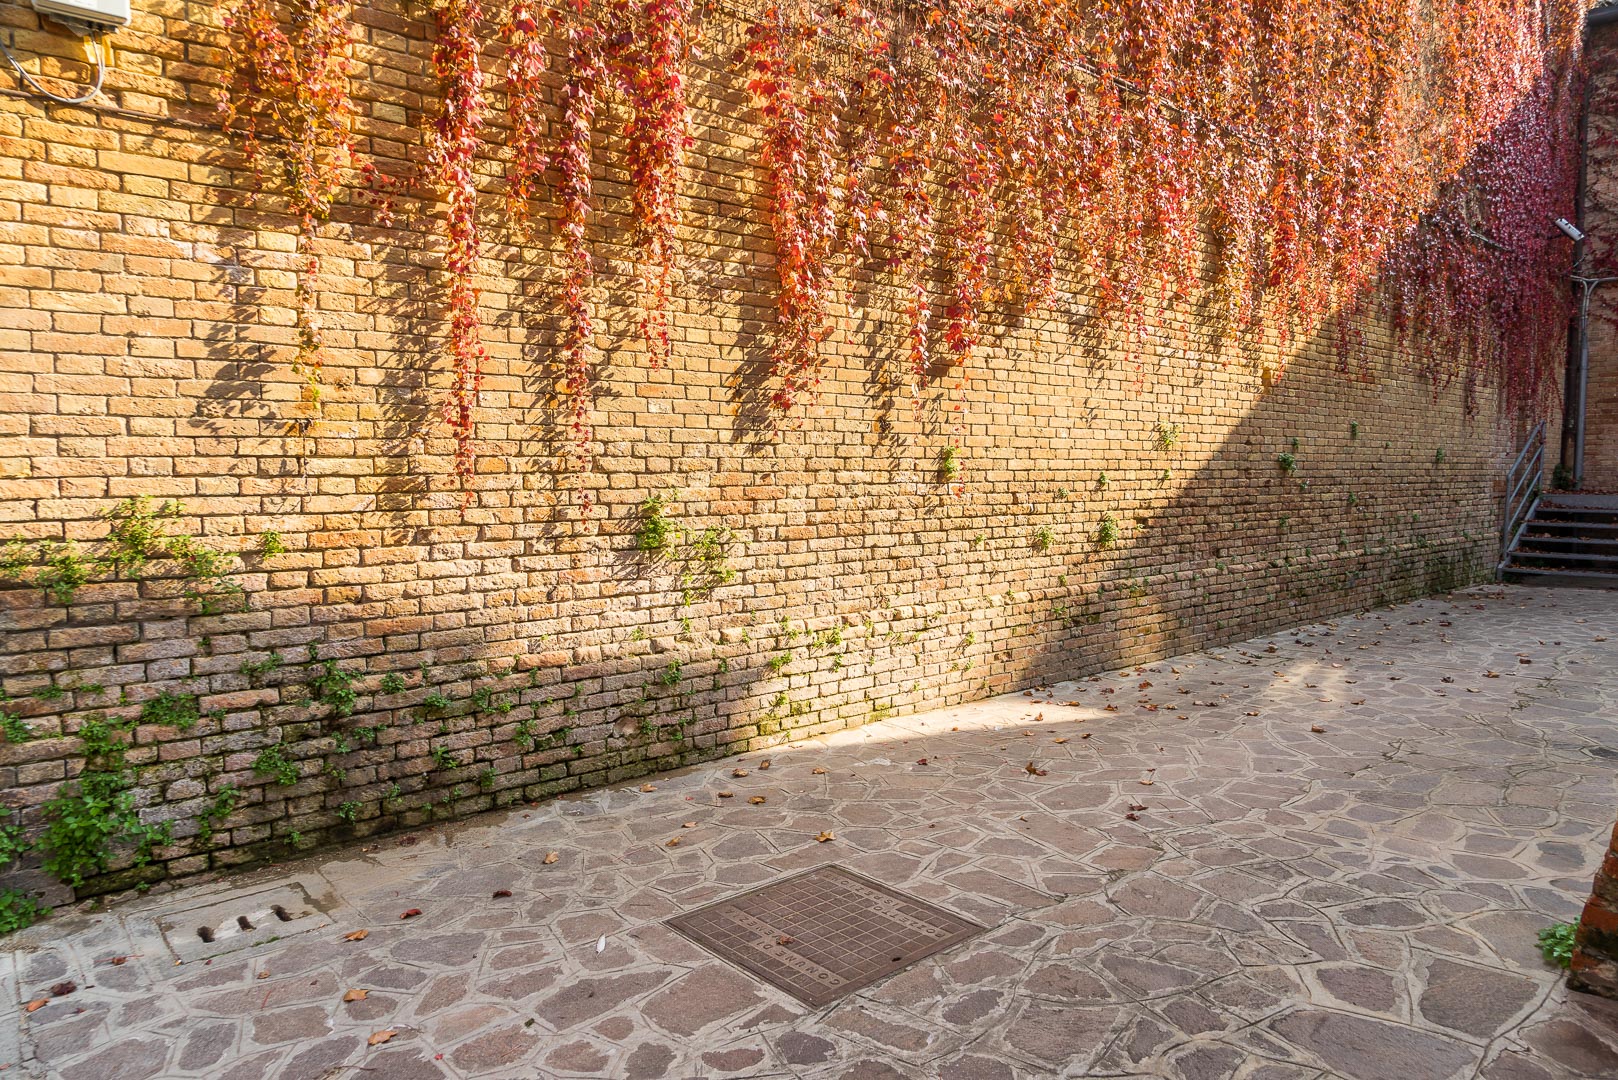 Backplate • ID: 6135 • HDRI Haven - Street With Brick Wall Covered With Leaves